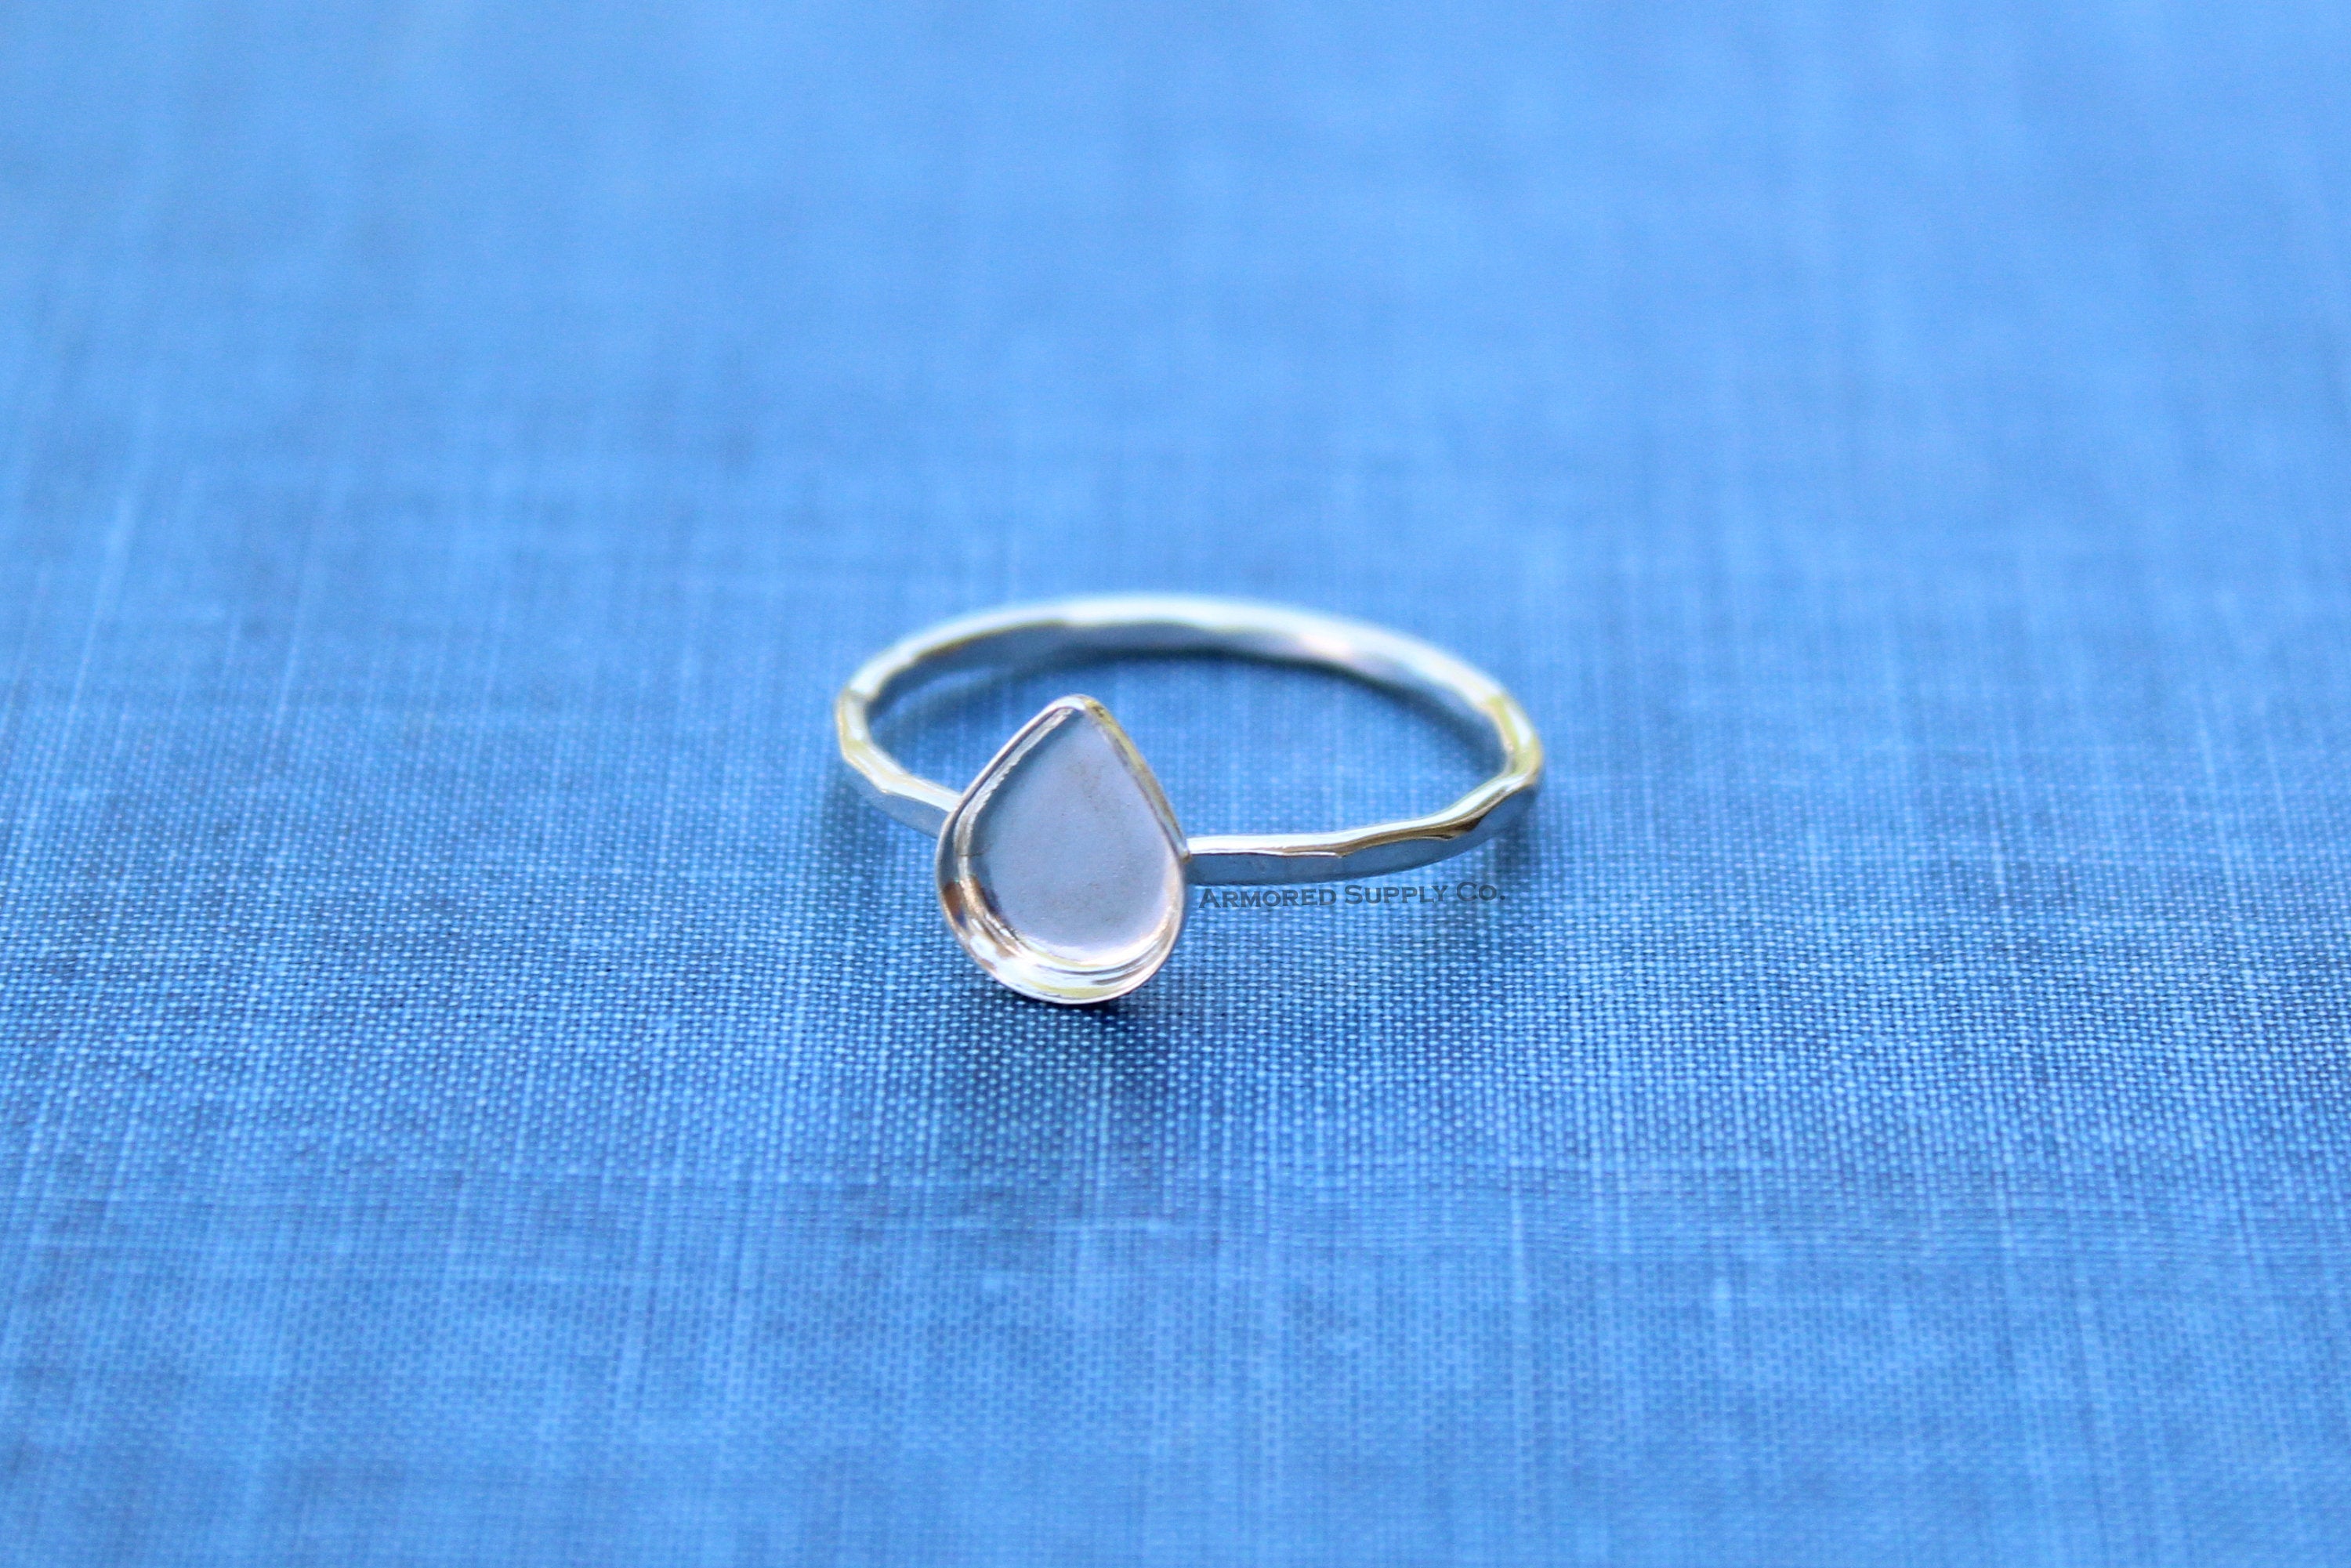 Silver Pear Tear Drop Bezel Cup Ring blank, Cabochon Bezel, Cab Resin, Breast Milk, DIY jewelry supplies, build your ring, wholesale jewelry